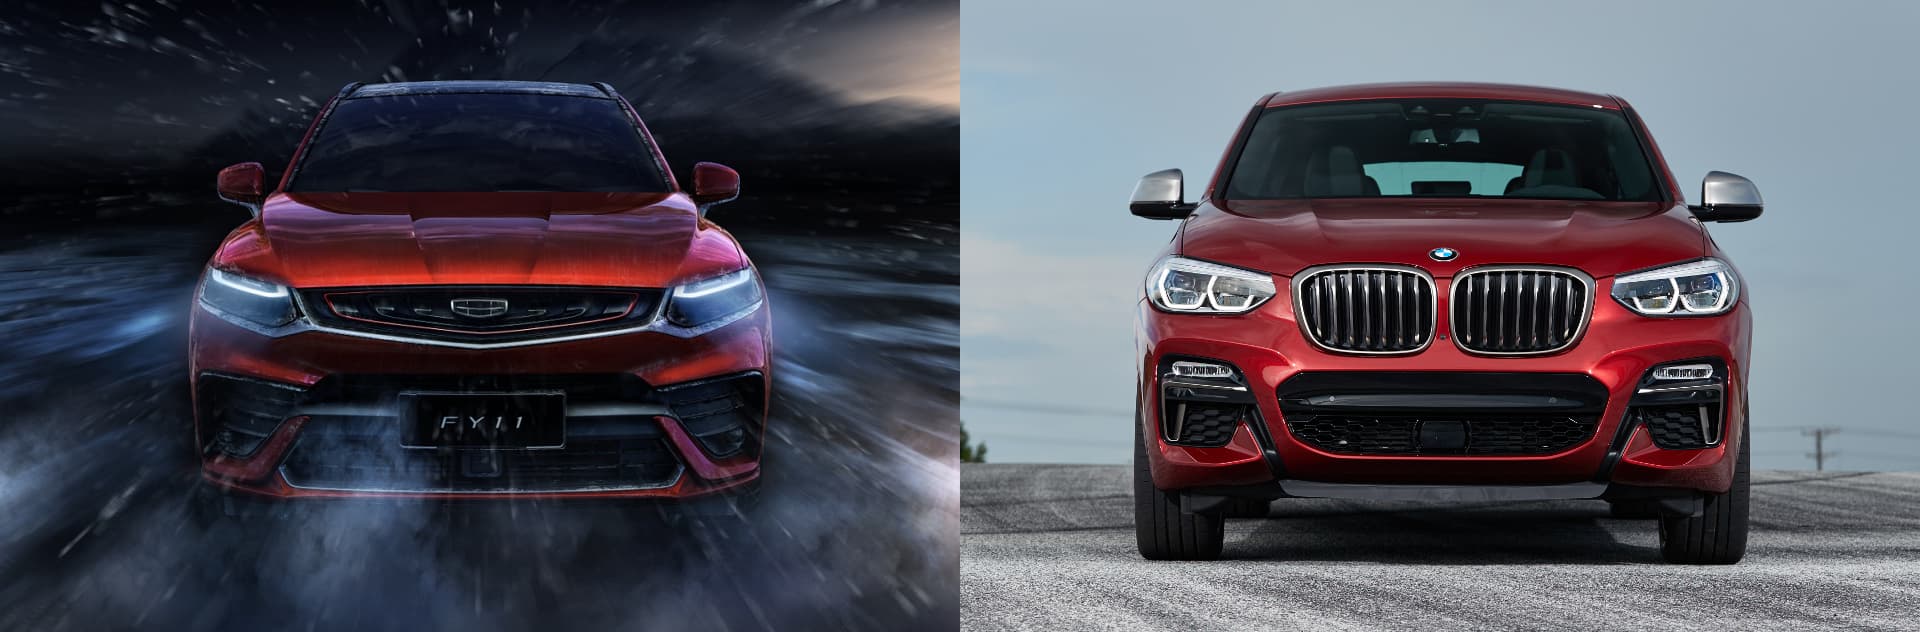 Chinese SUV That Doesn't Look Like BMW X4 "Looks Like BMW X4"